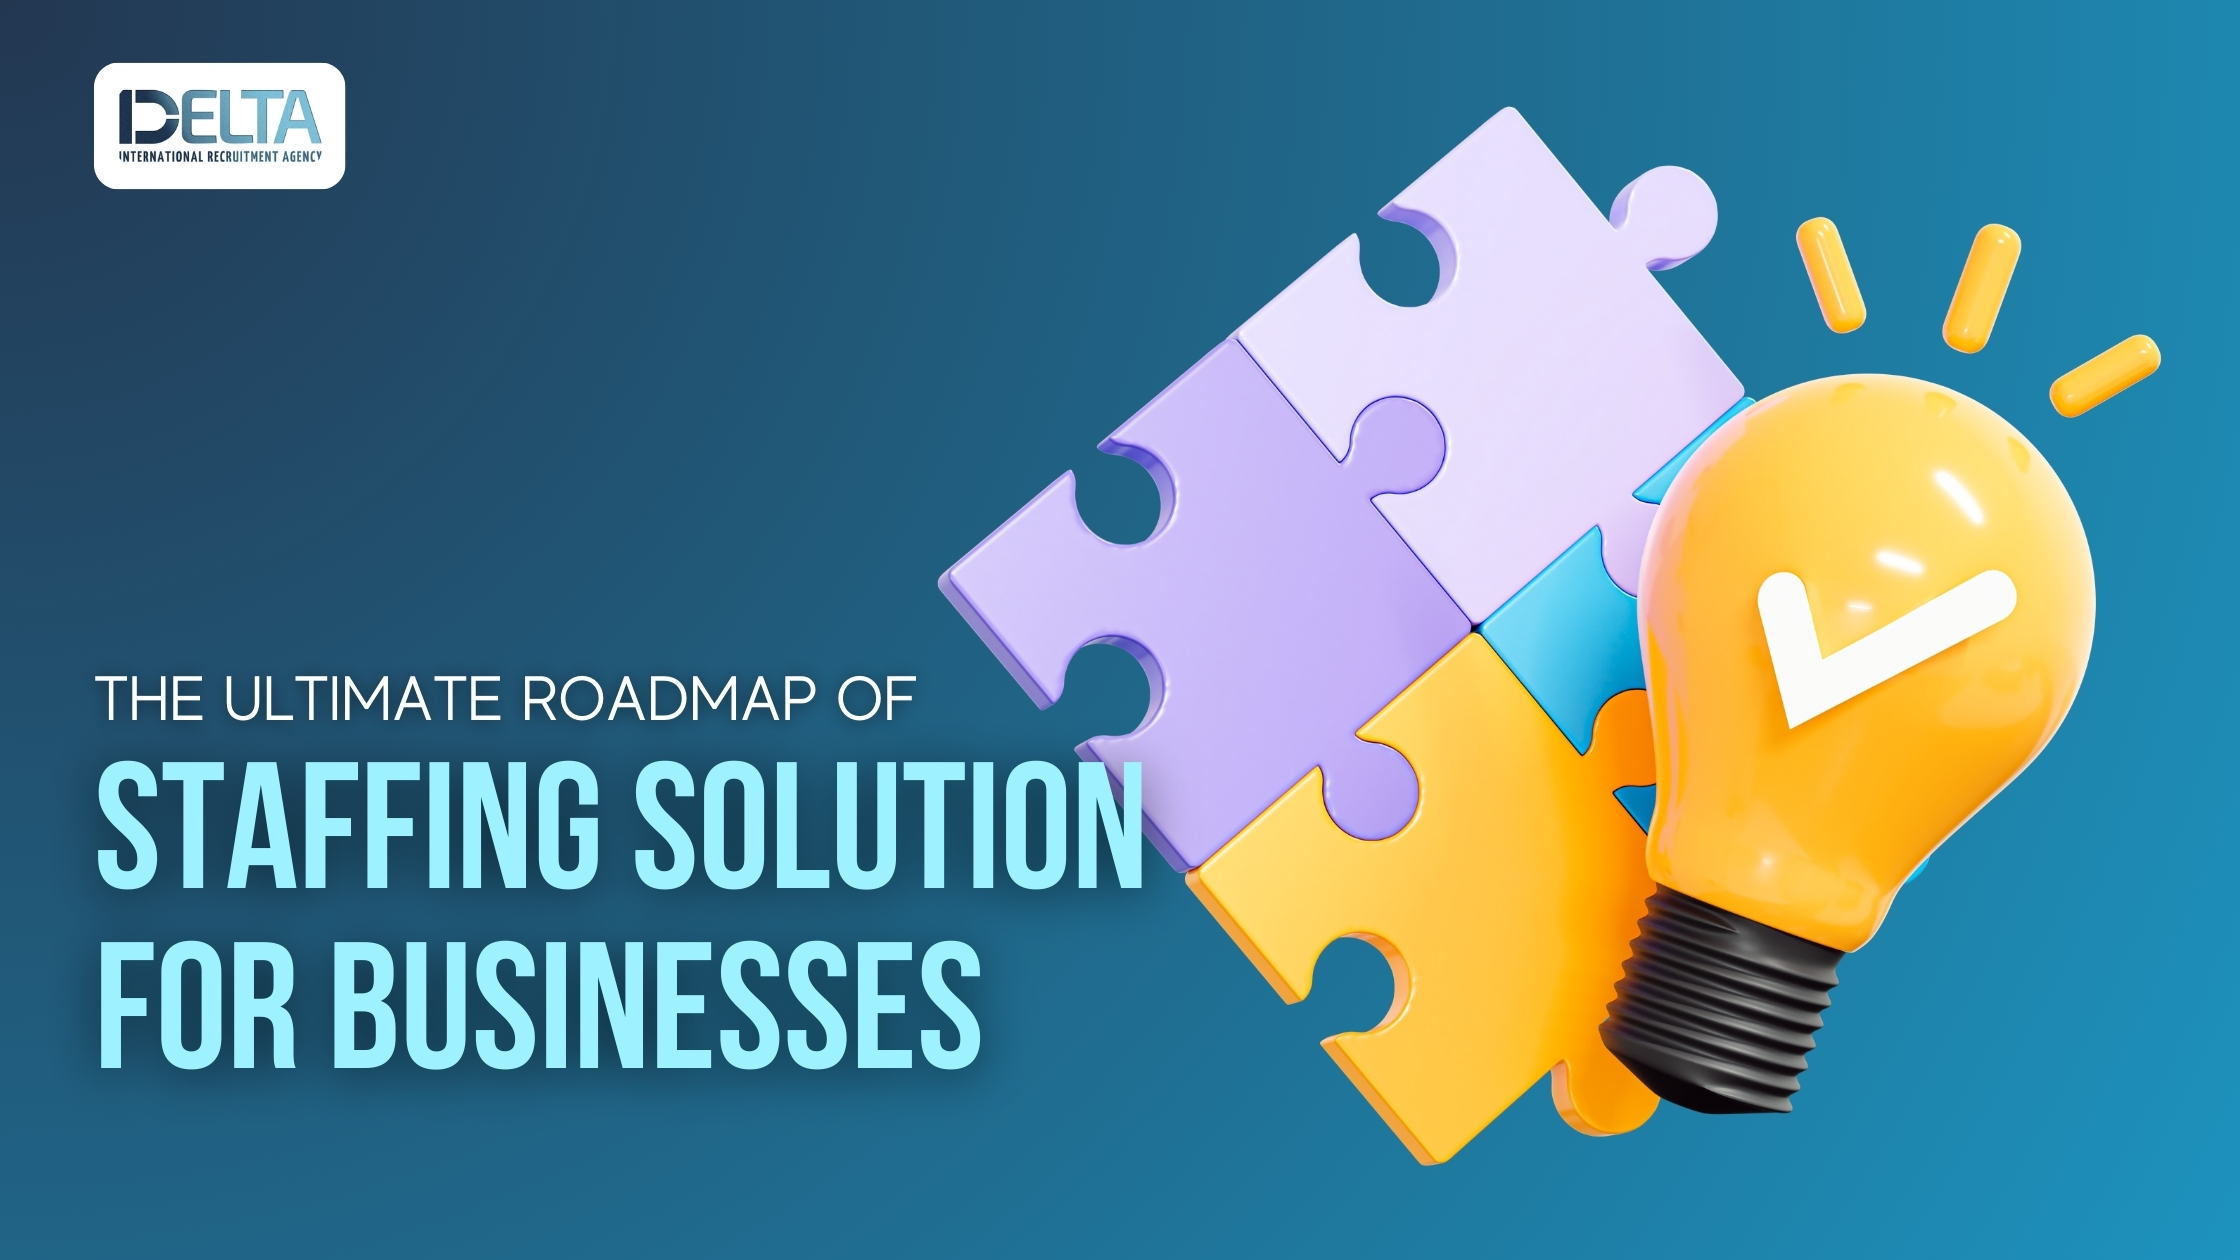 The Ultimate Roadmap of Staffing Solution for Businesses in Gulf